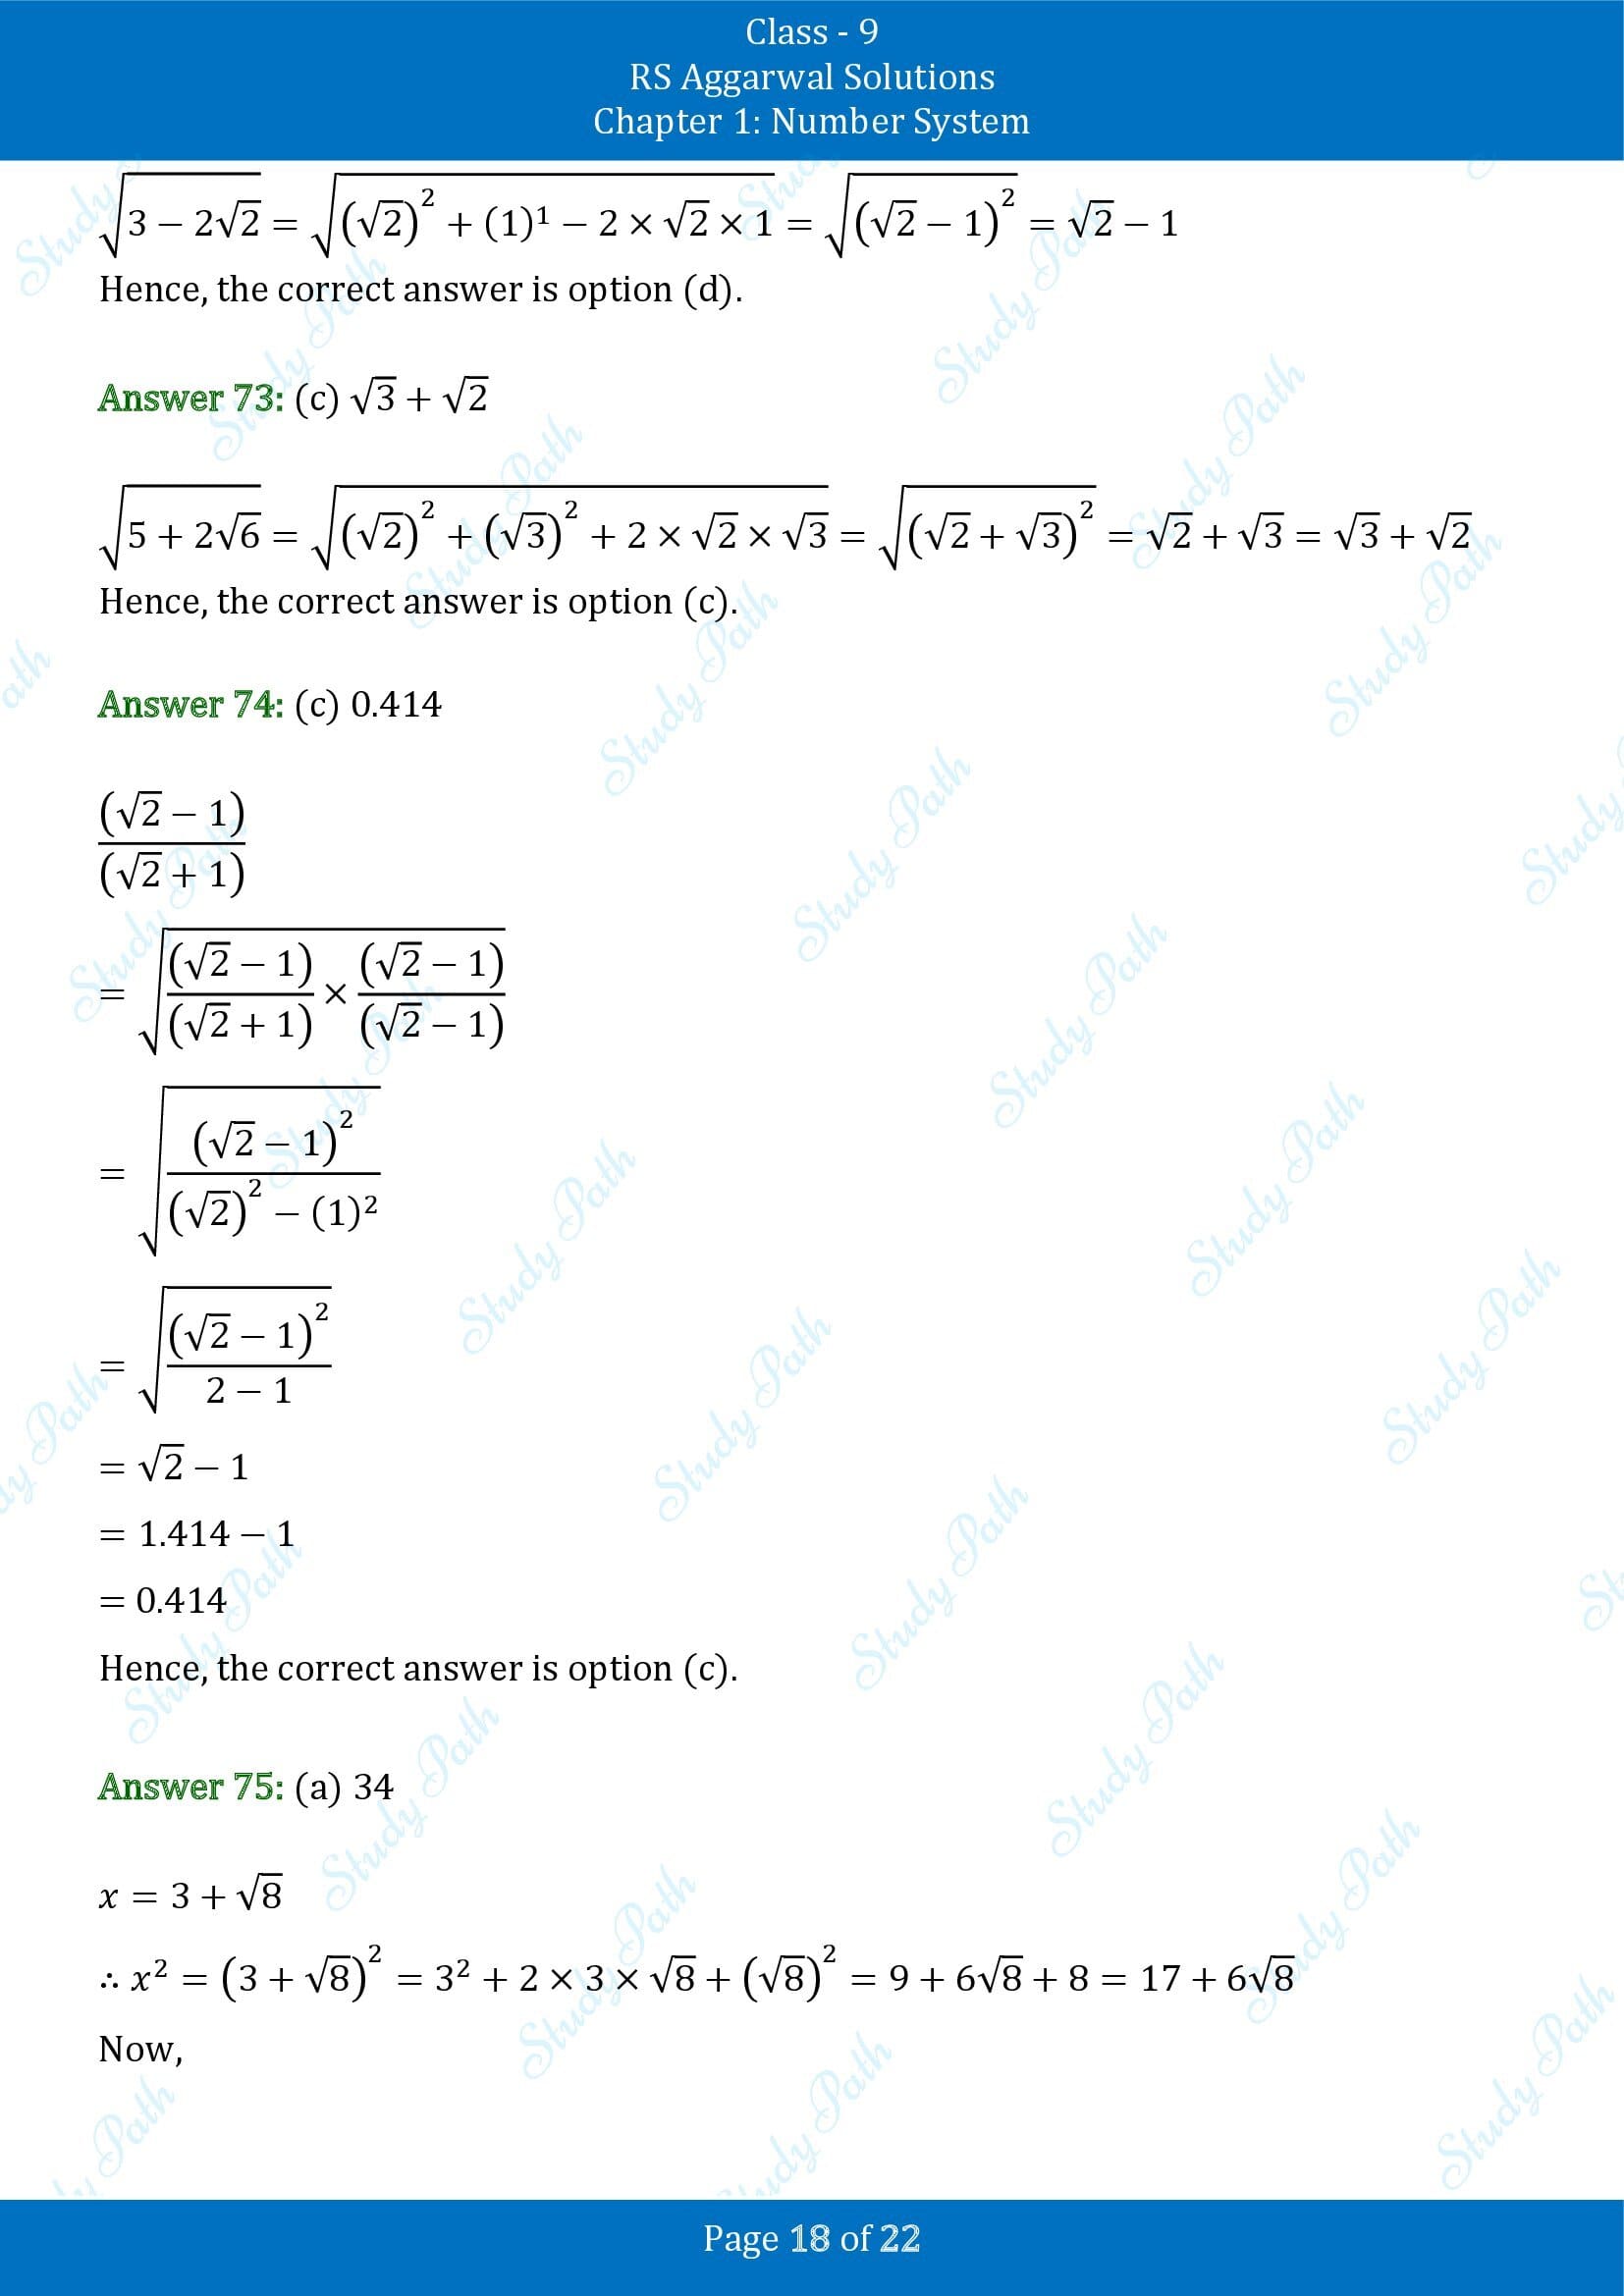 RS Aggarwal Solutions Class 9 Chapter 1 Number System Multiple Choice Questions MCQs 00018